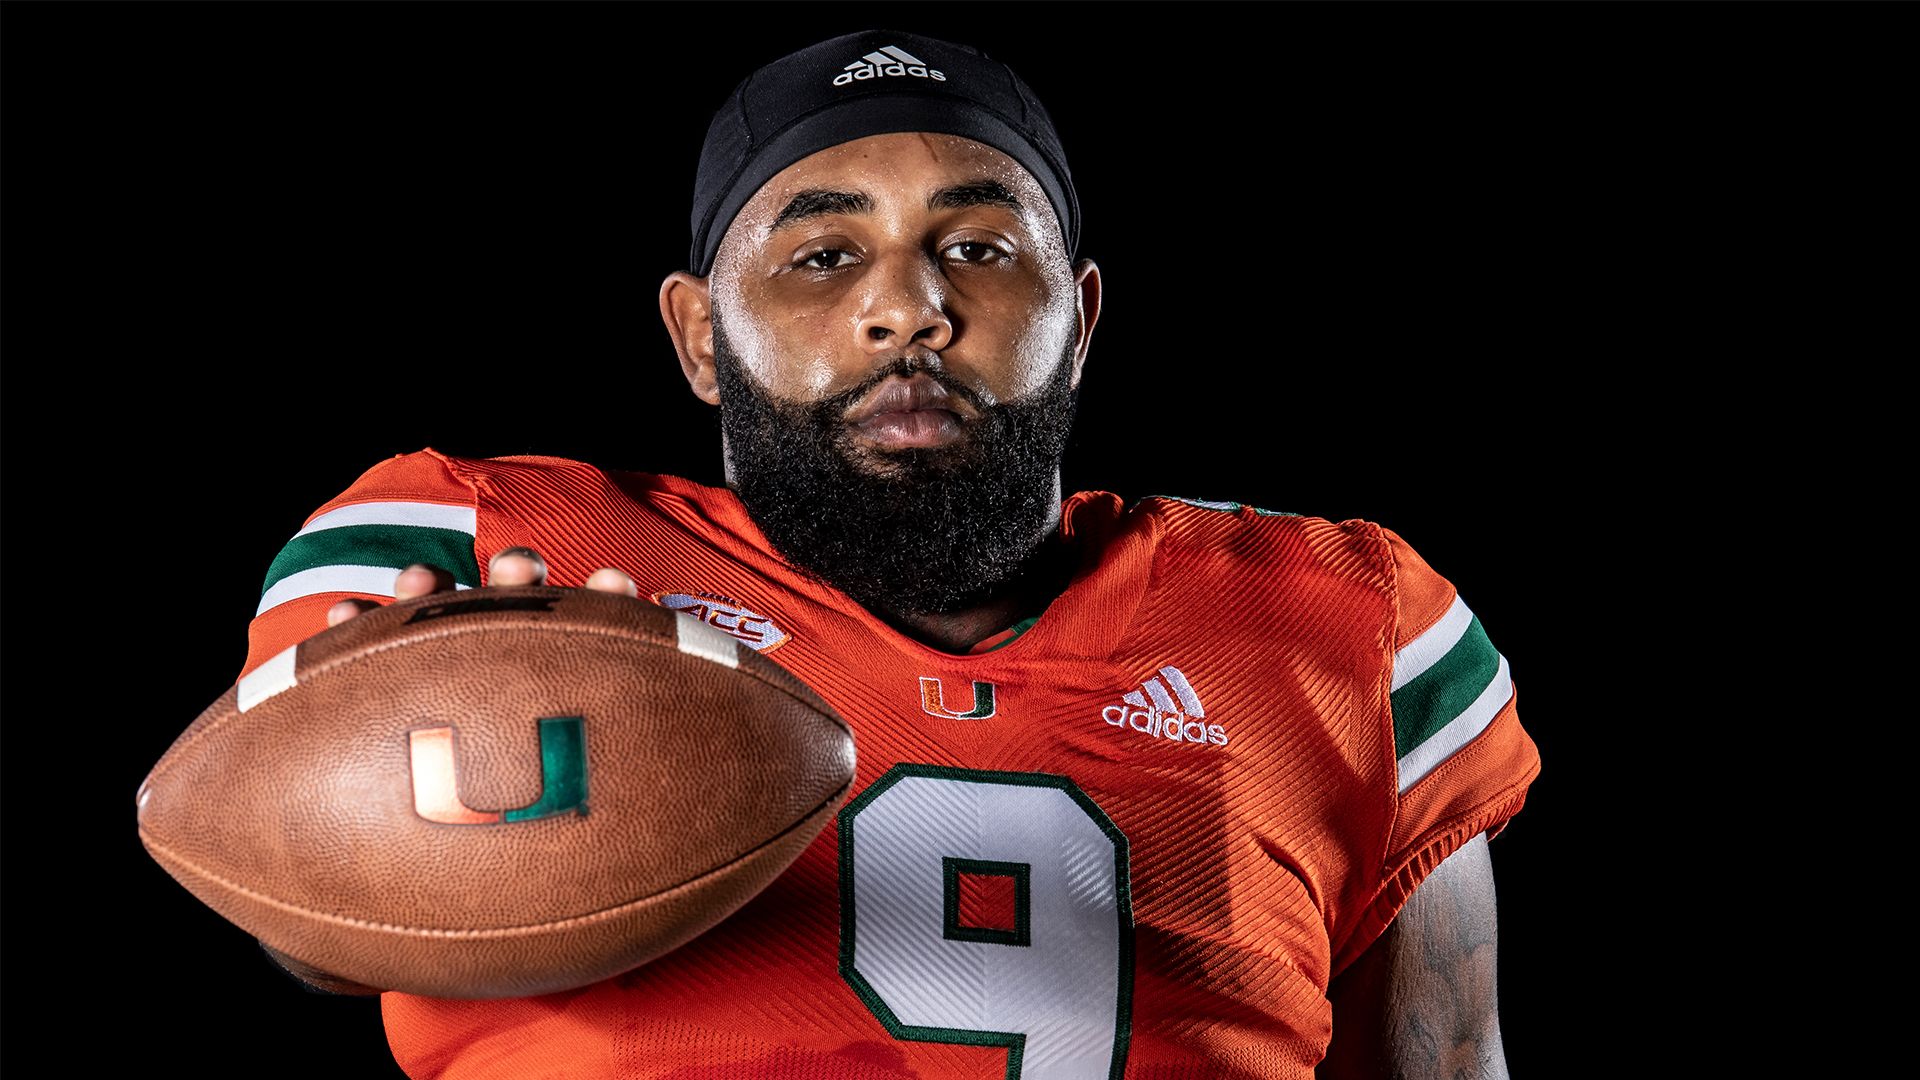 Willis Eager to Lead Canes Against Hometown LSU